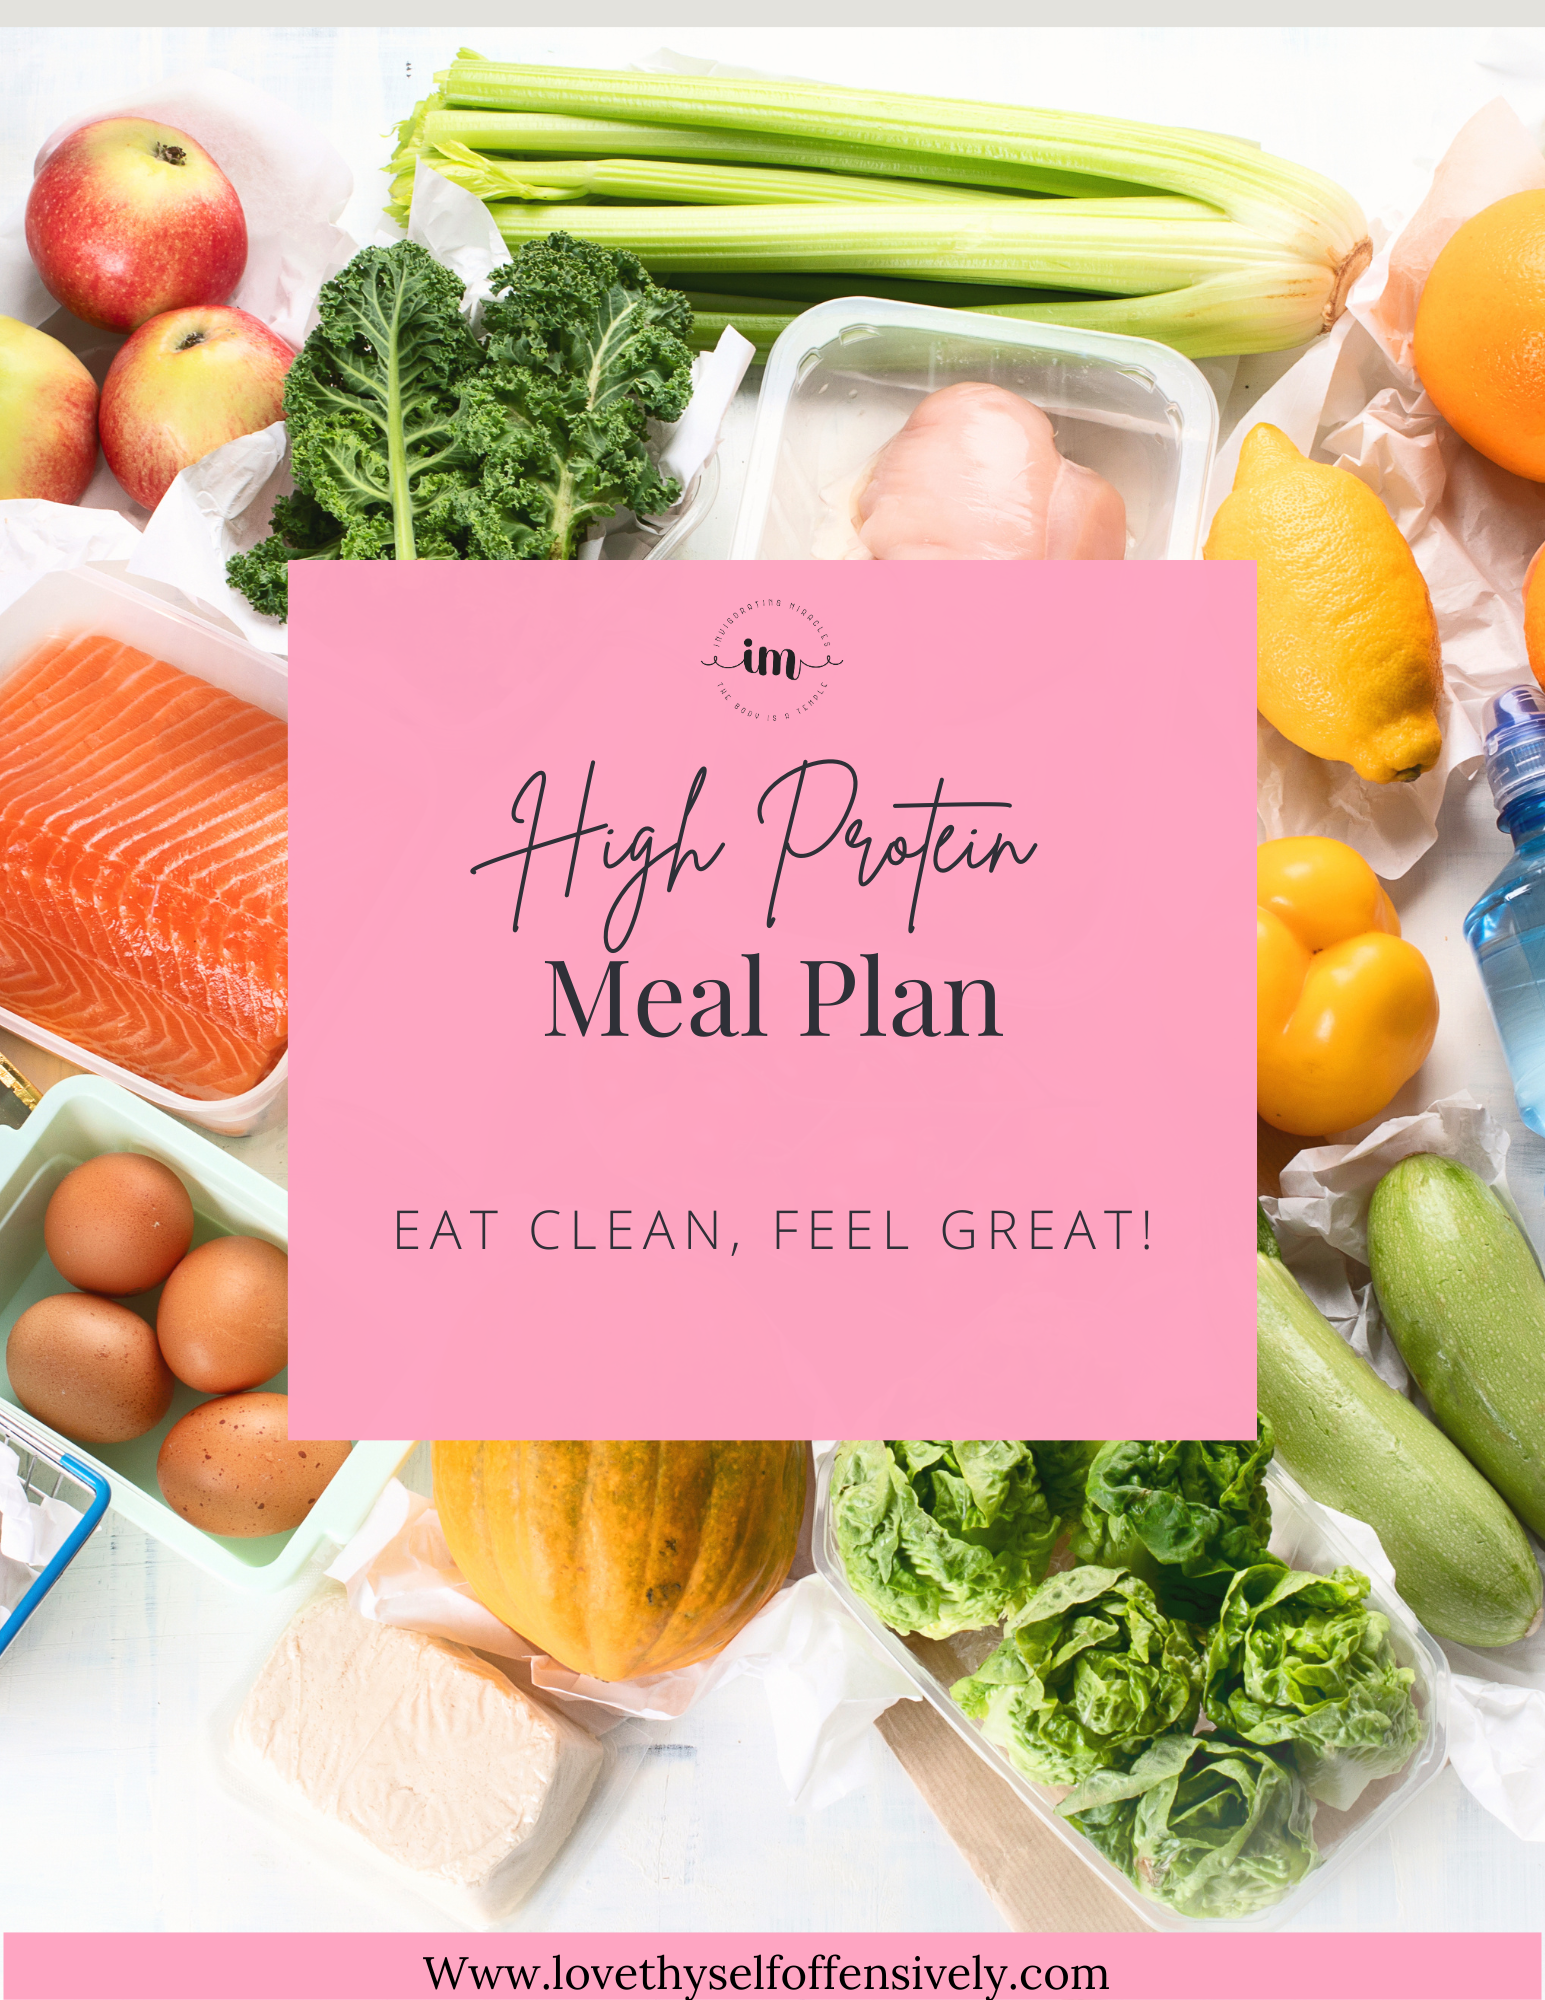 High protein meal plan for a self love journey